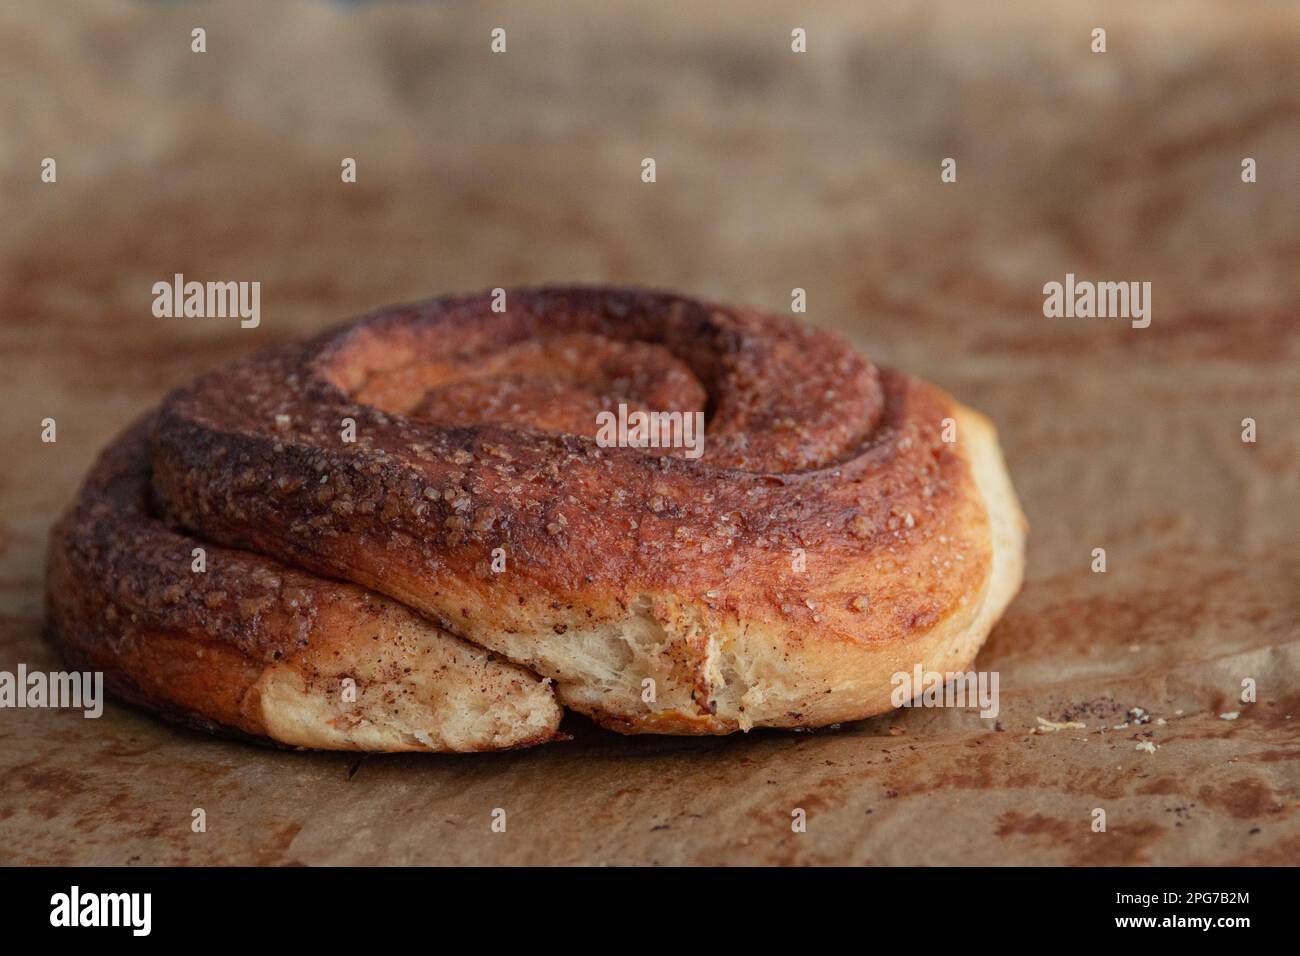 side view of homemade cinnamon bun on sheet of baking paper. Photographed with shallow depth of field. Stock Photo